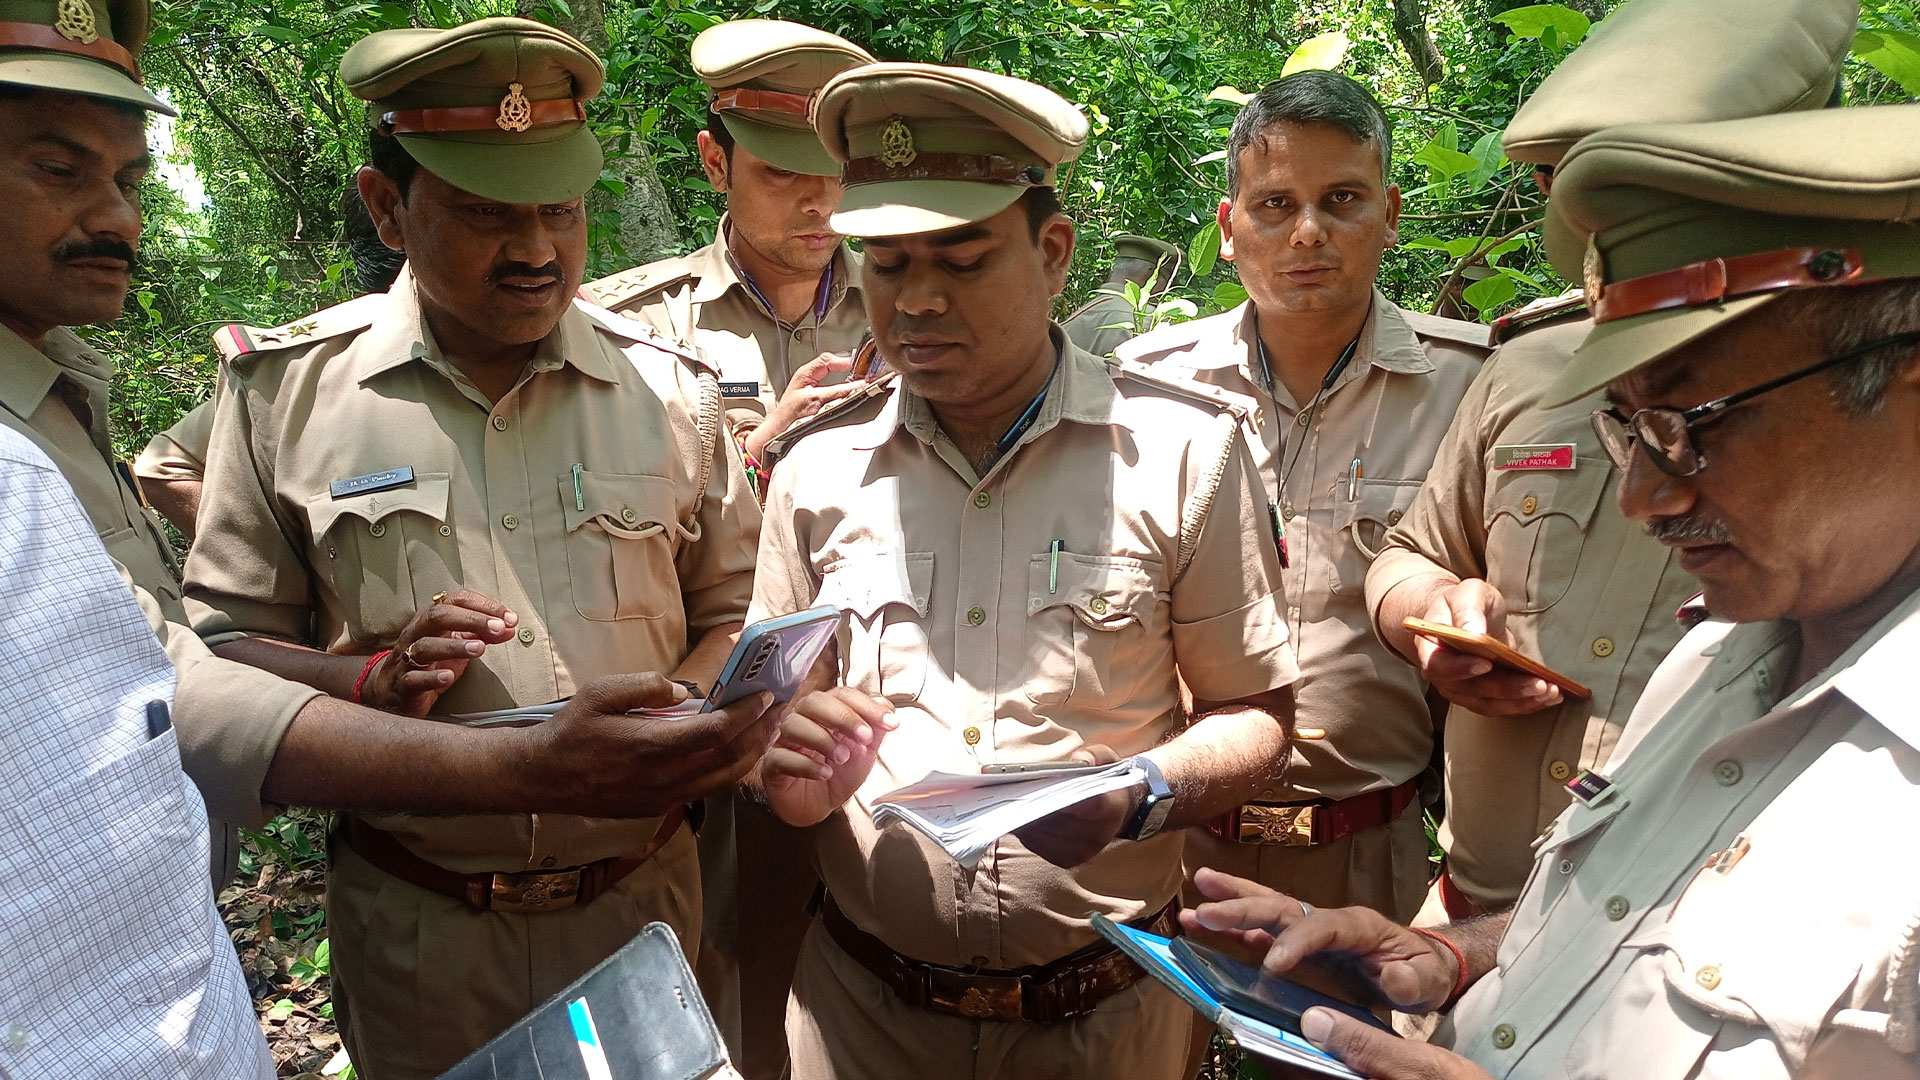 Forest officers viewing the Van System, a mobile app and web portal for forest inventory and ecosystem data collection, on their smartphones